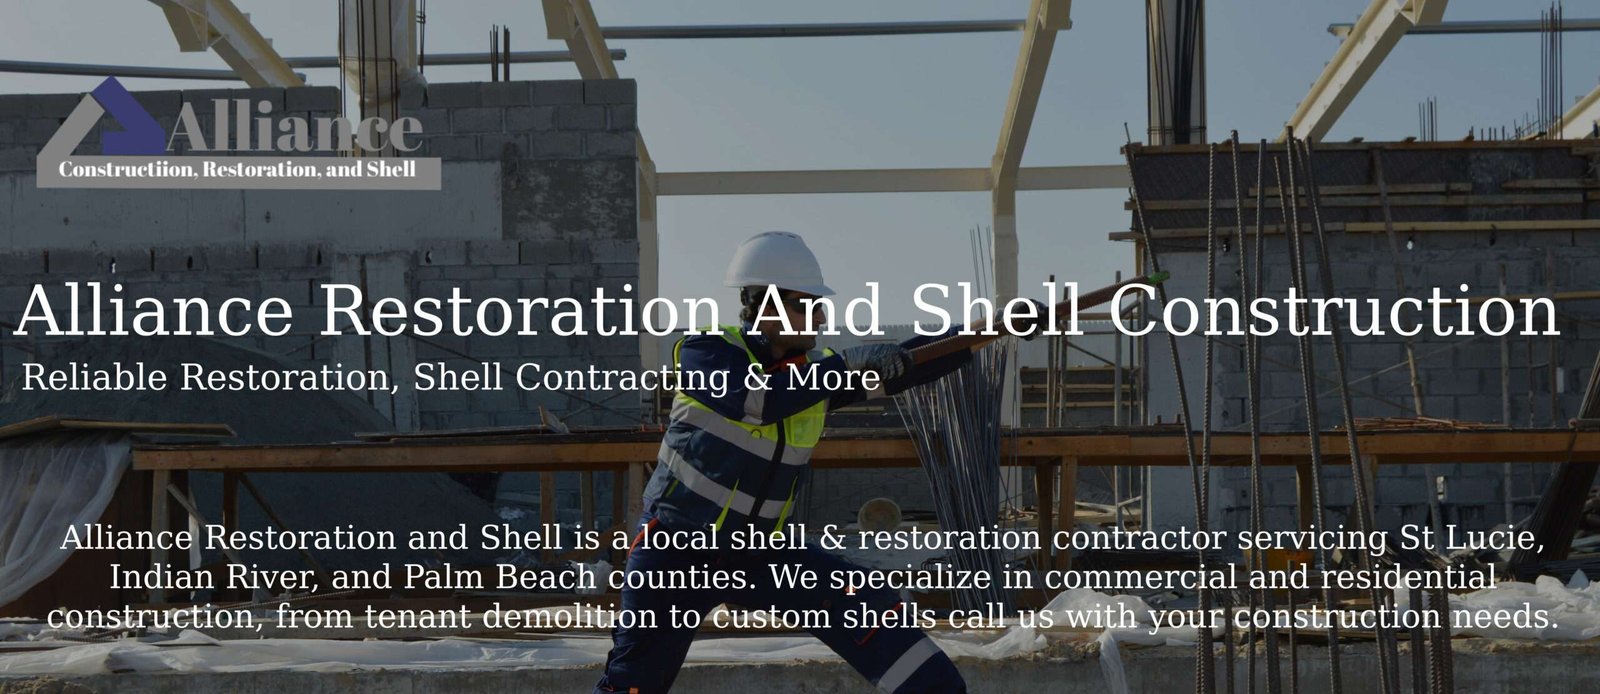 Alliance Restoration And Shell Construction